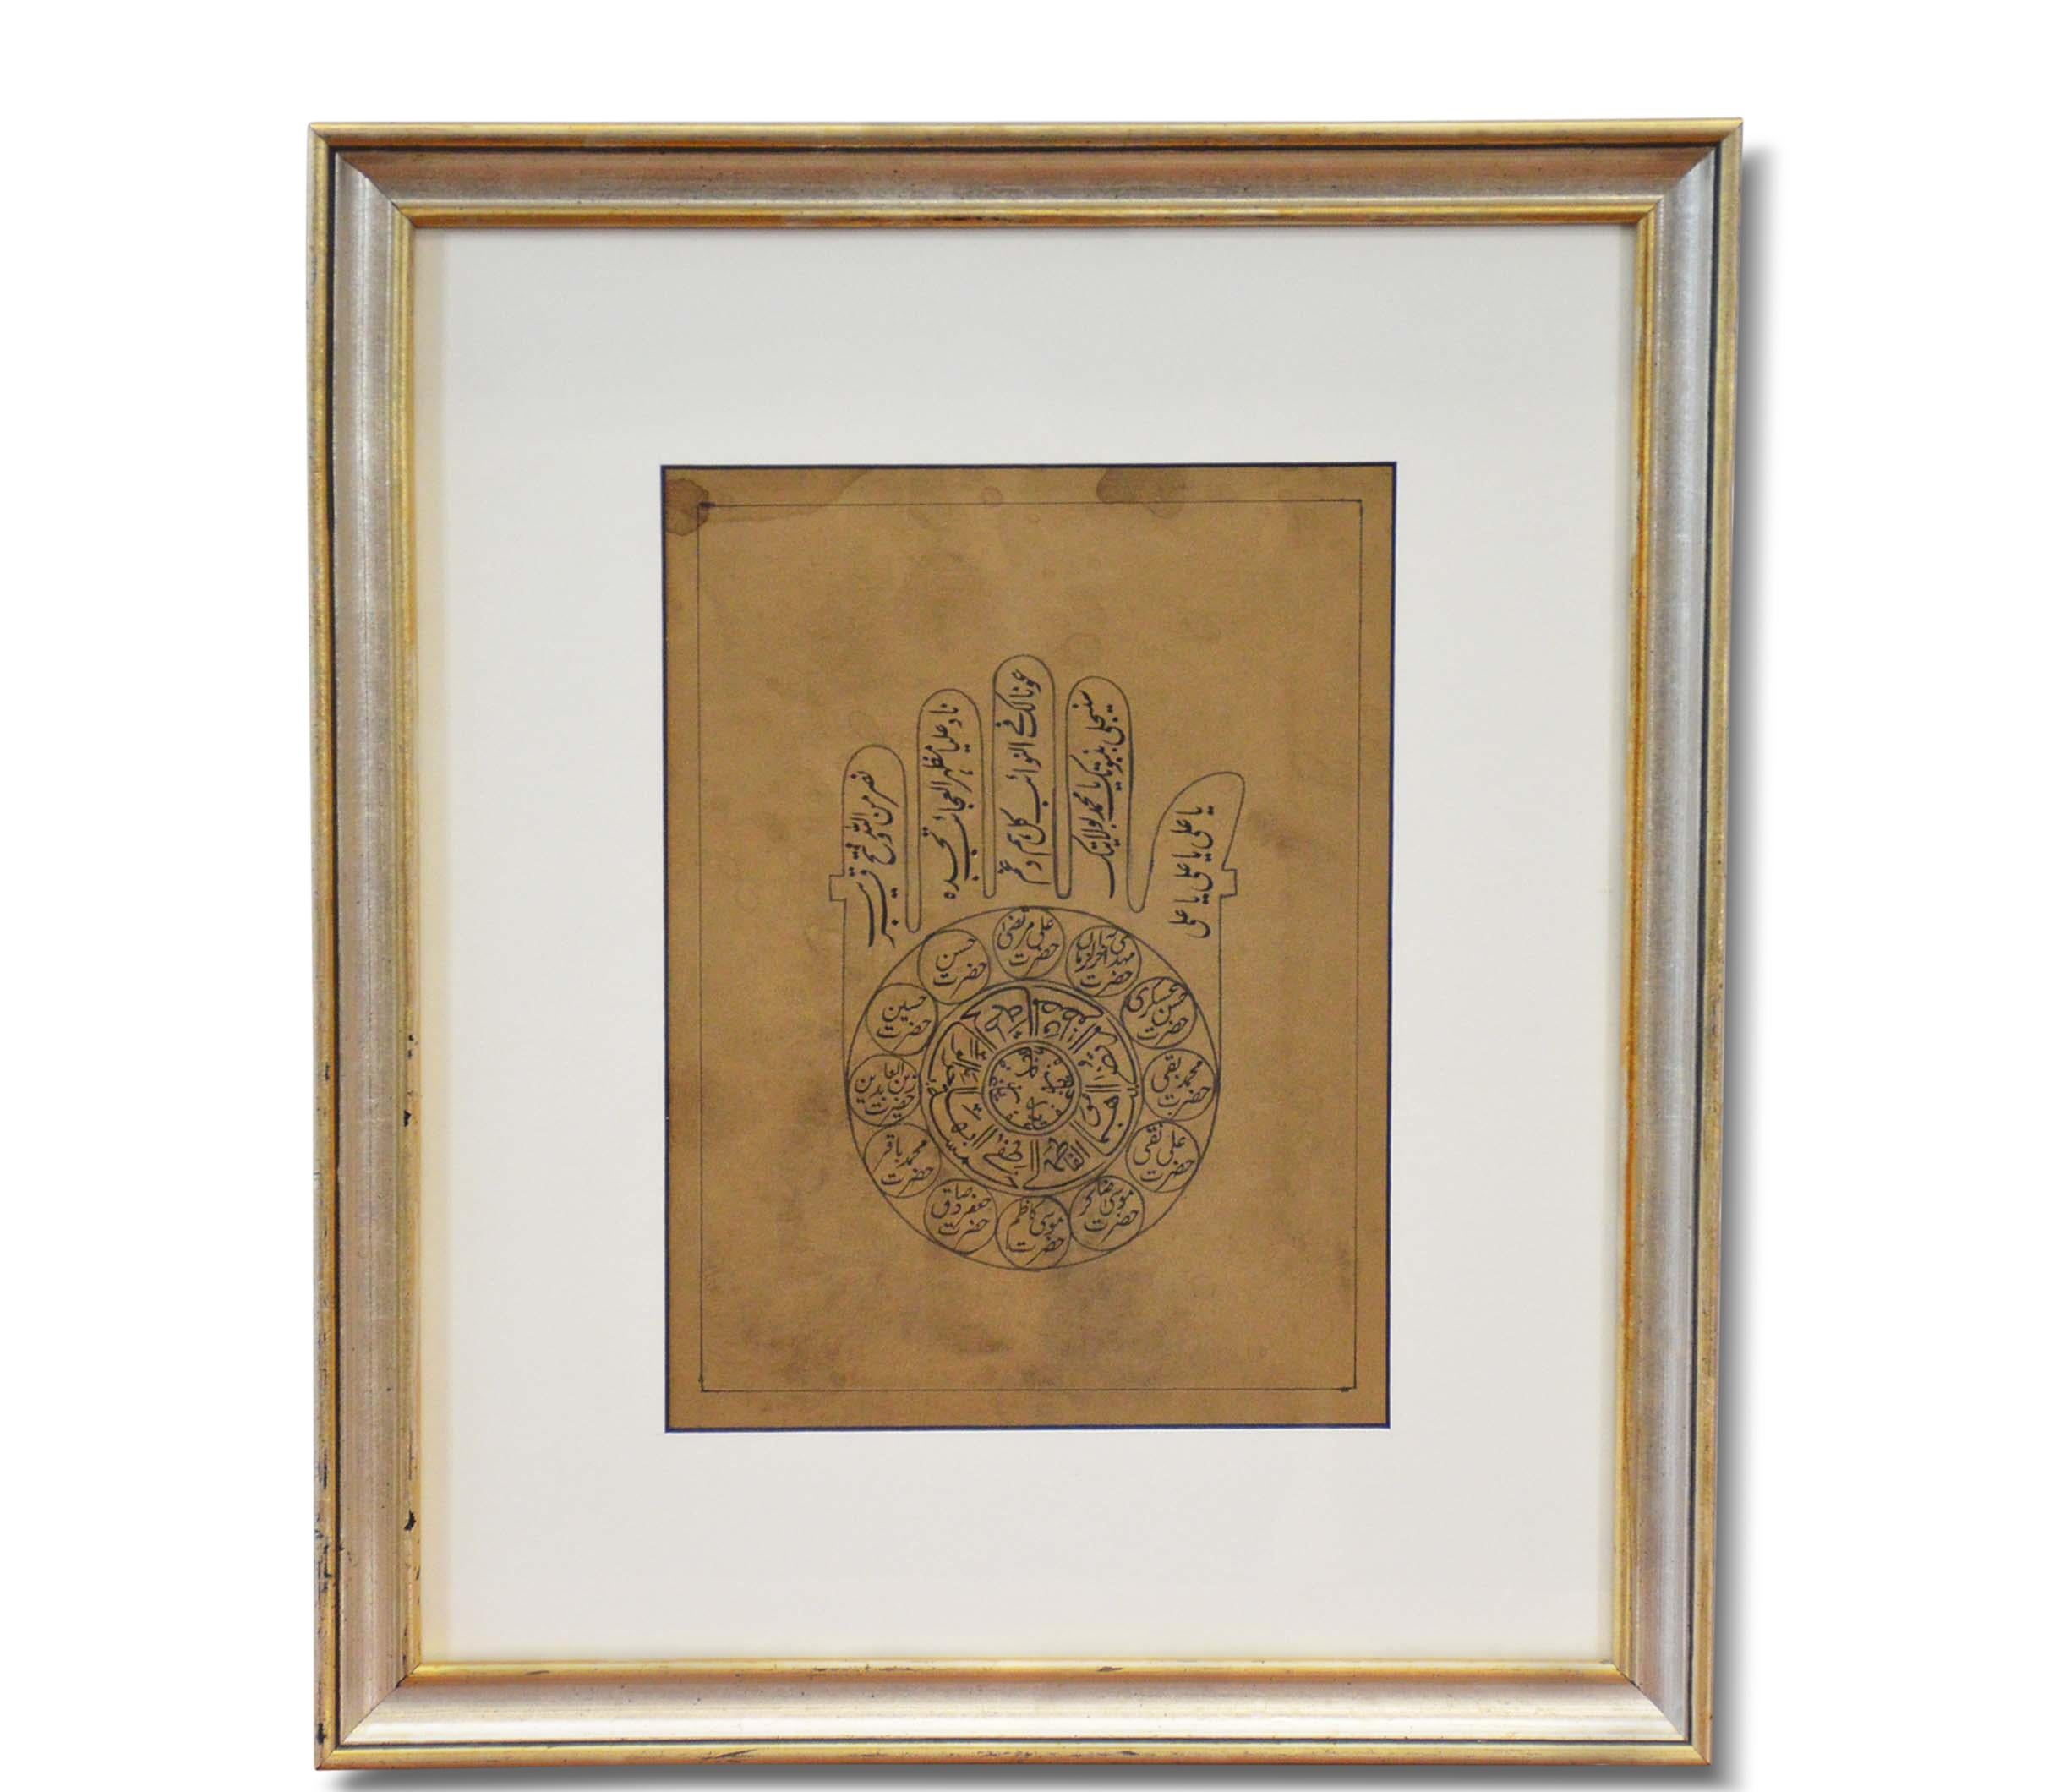 Astrological Hand-Painted on Parchment Print Depicting a Hand with Calligraphy For Sale 2